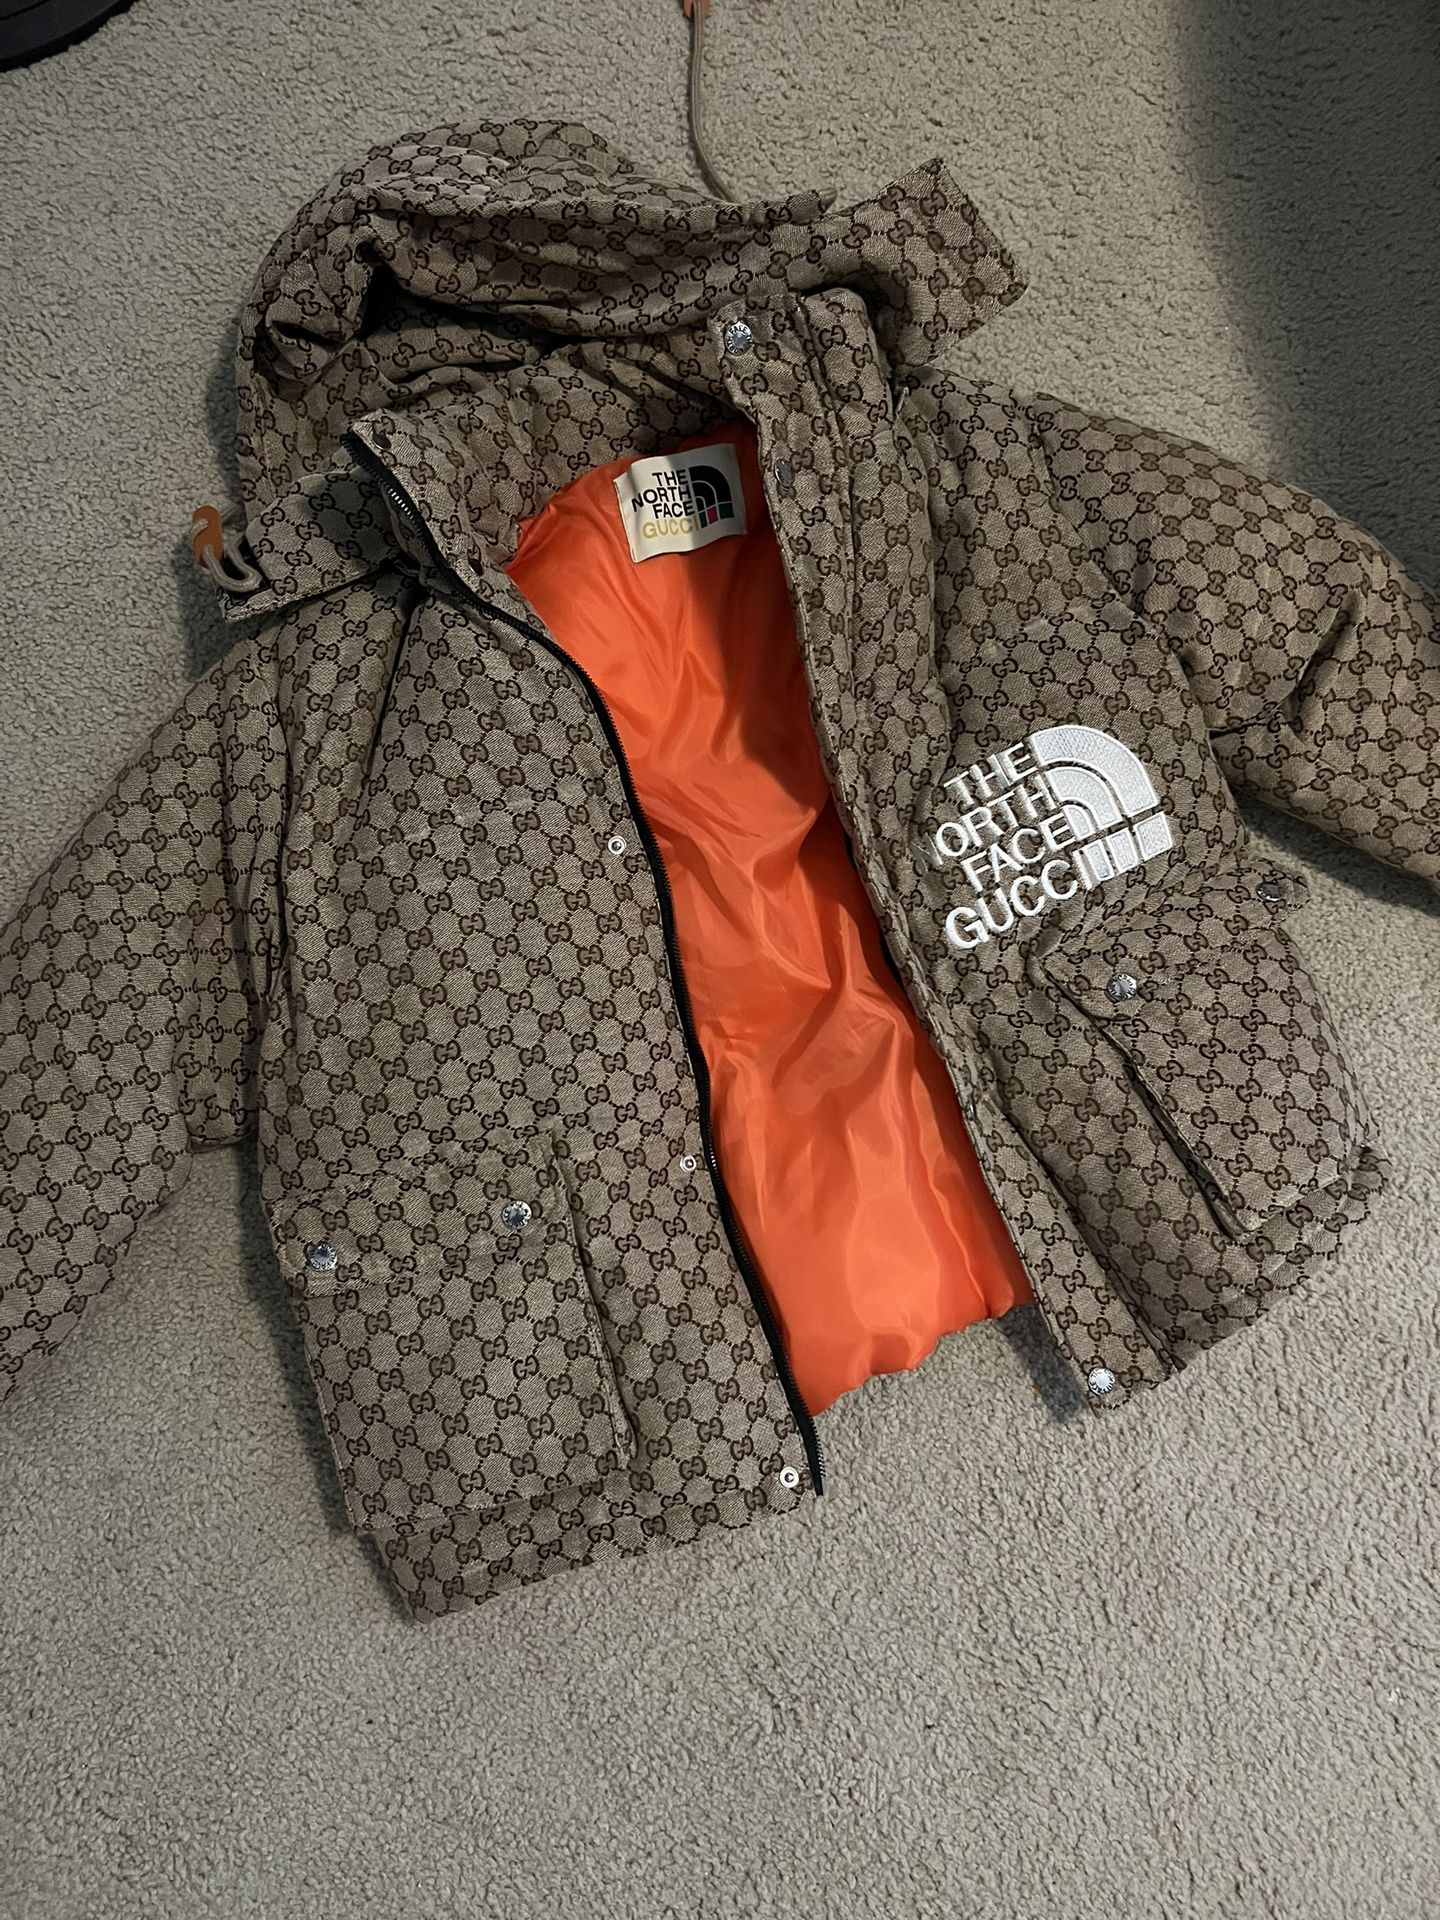 New Gucci The North Face Jacket